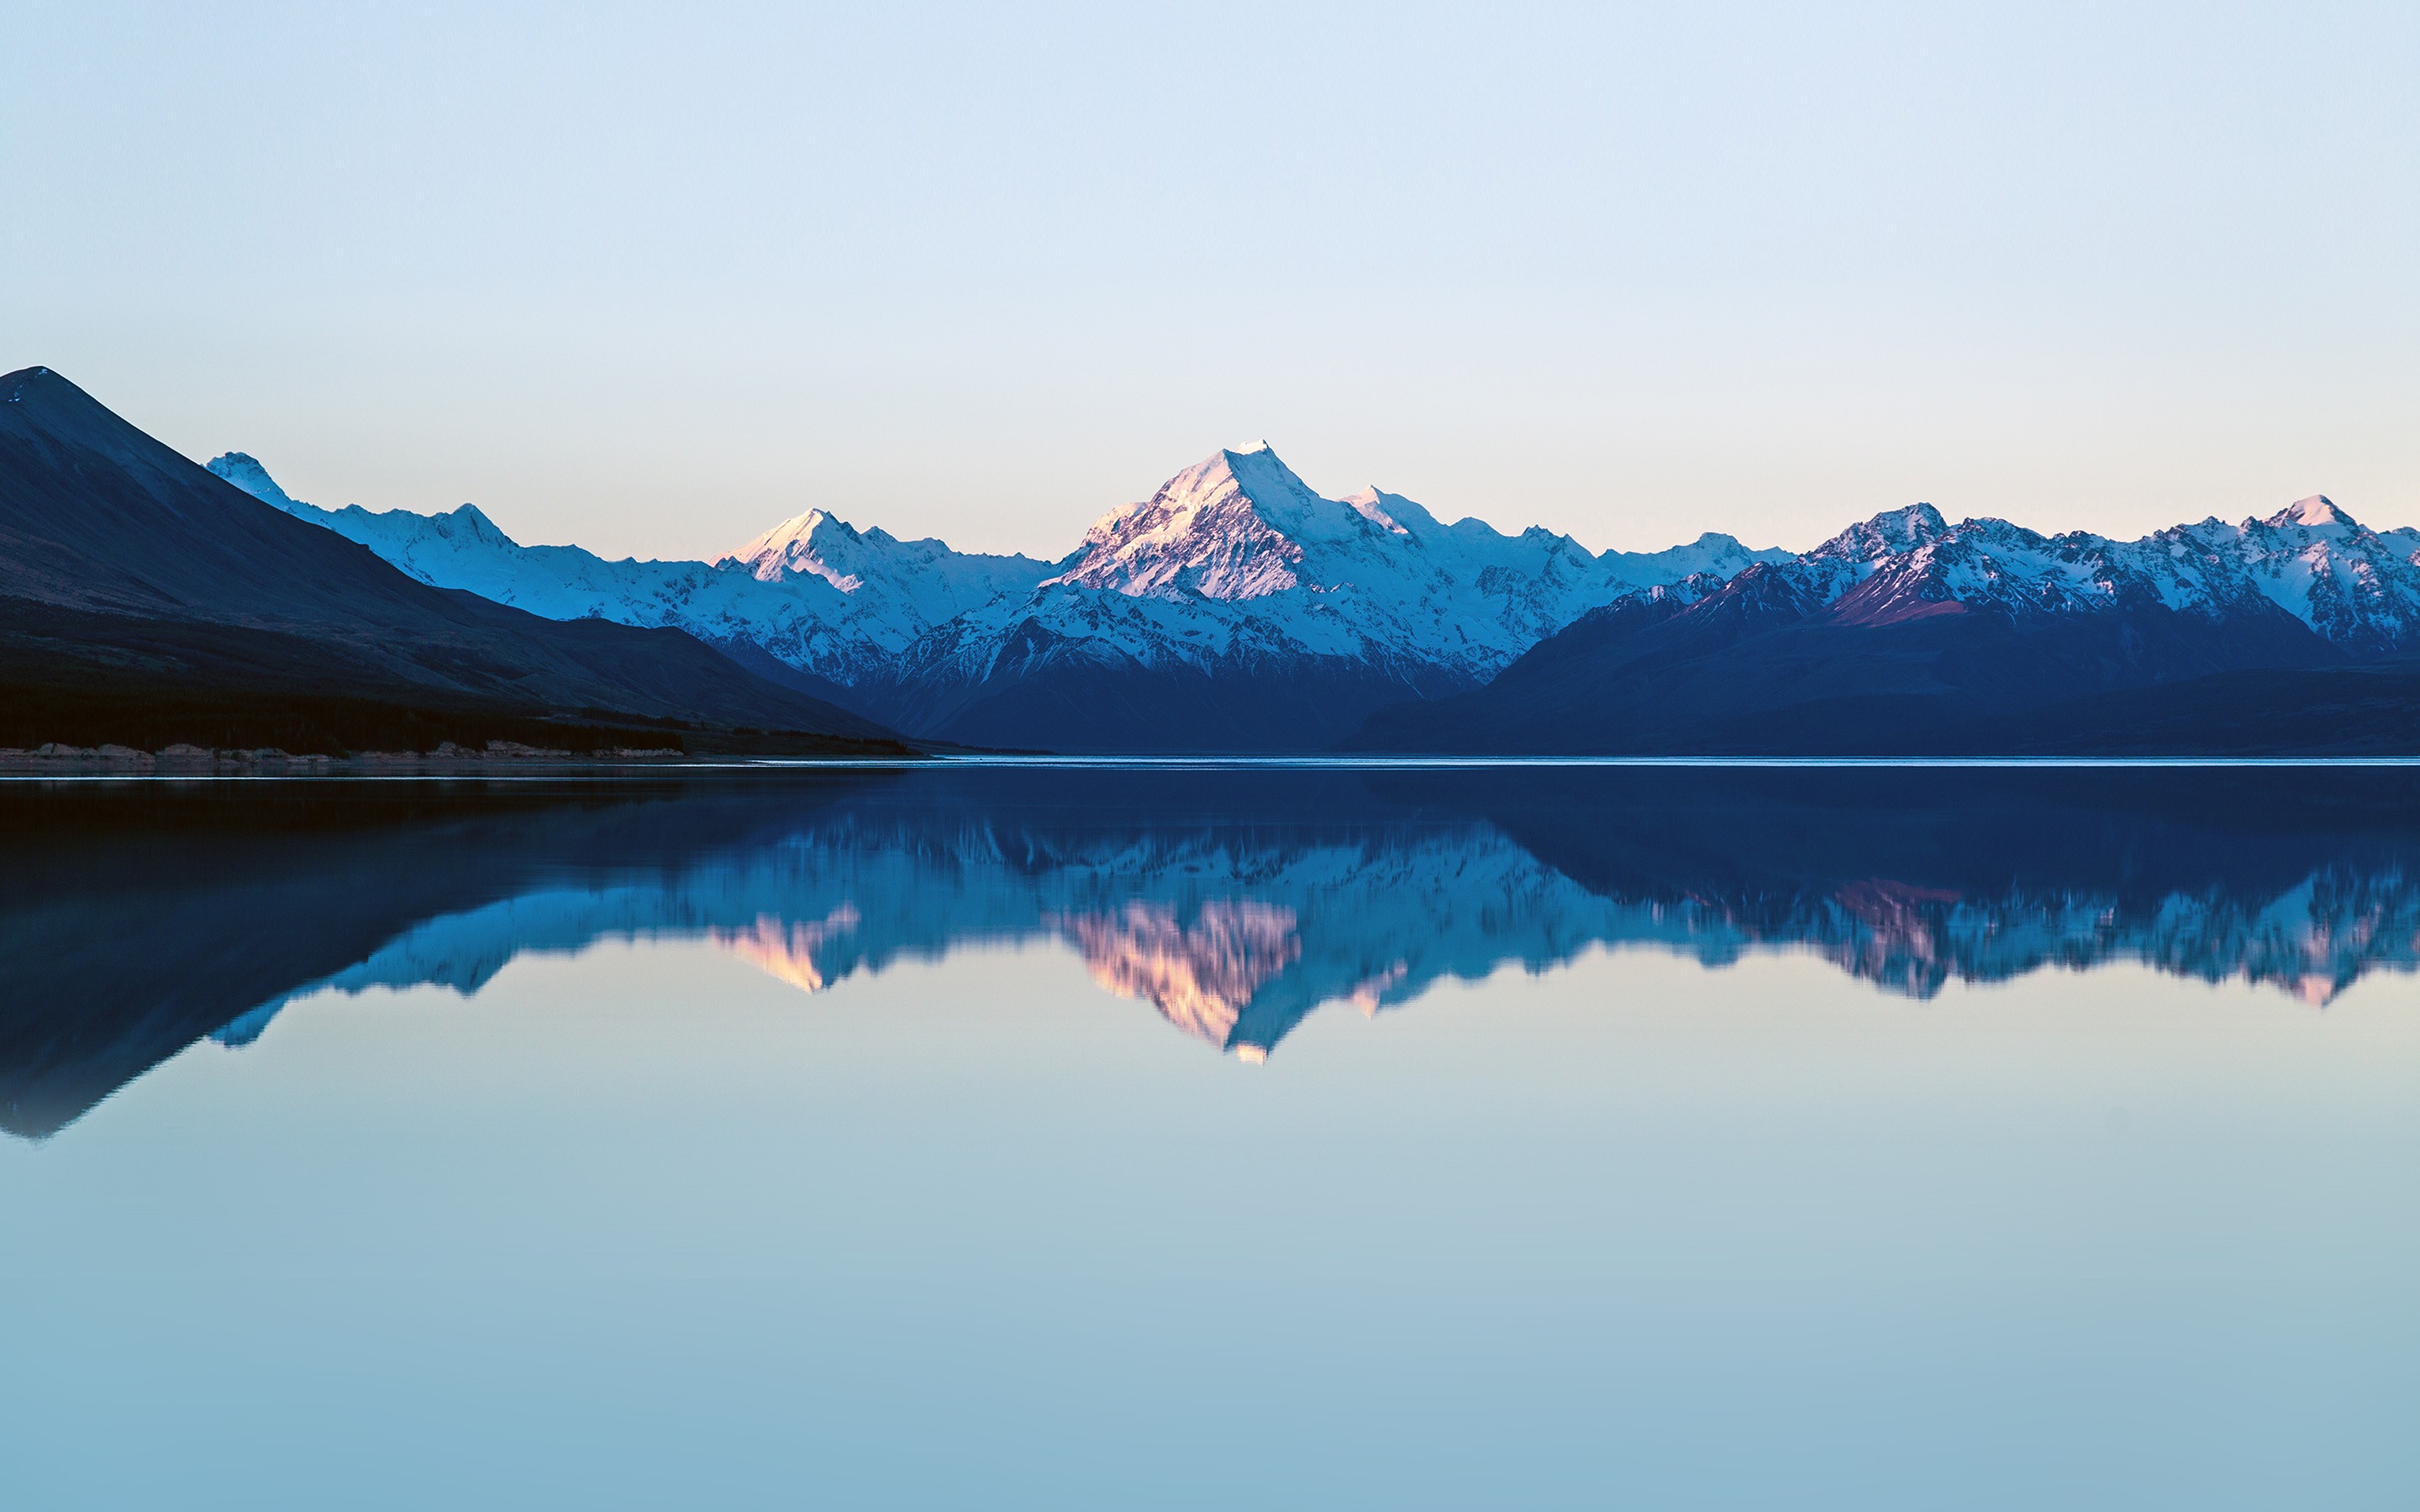 General 2880x1800 mountains snow nature water sky blue glass Mount Cook landscape calm waters New Zealand